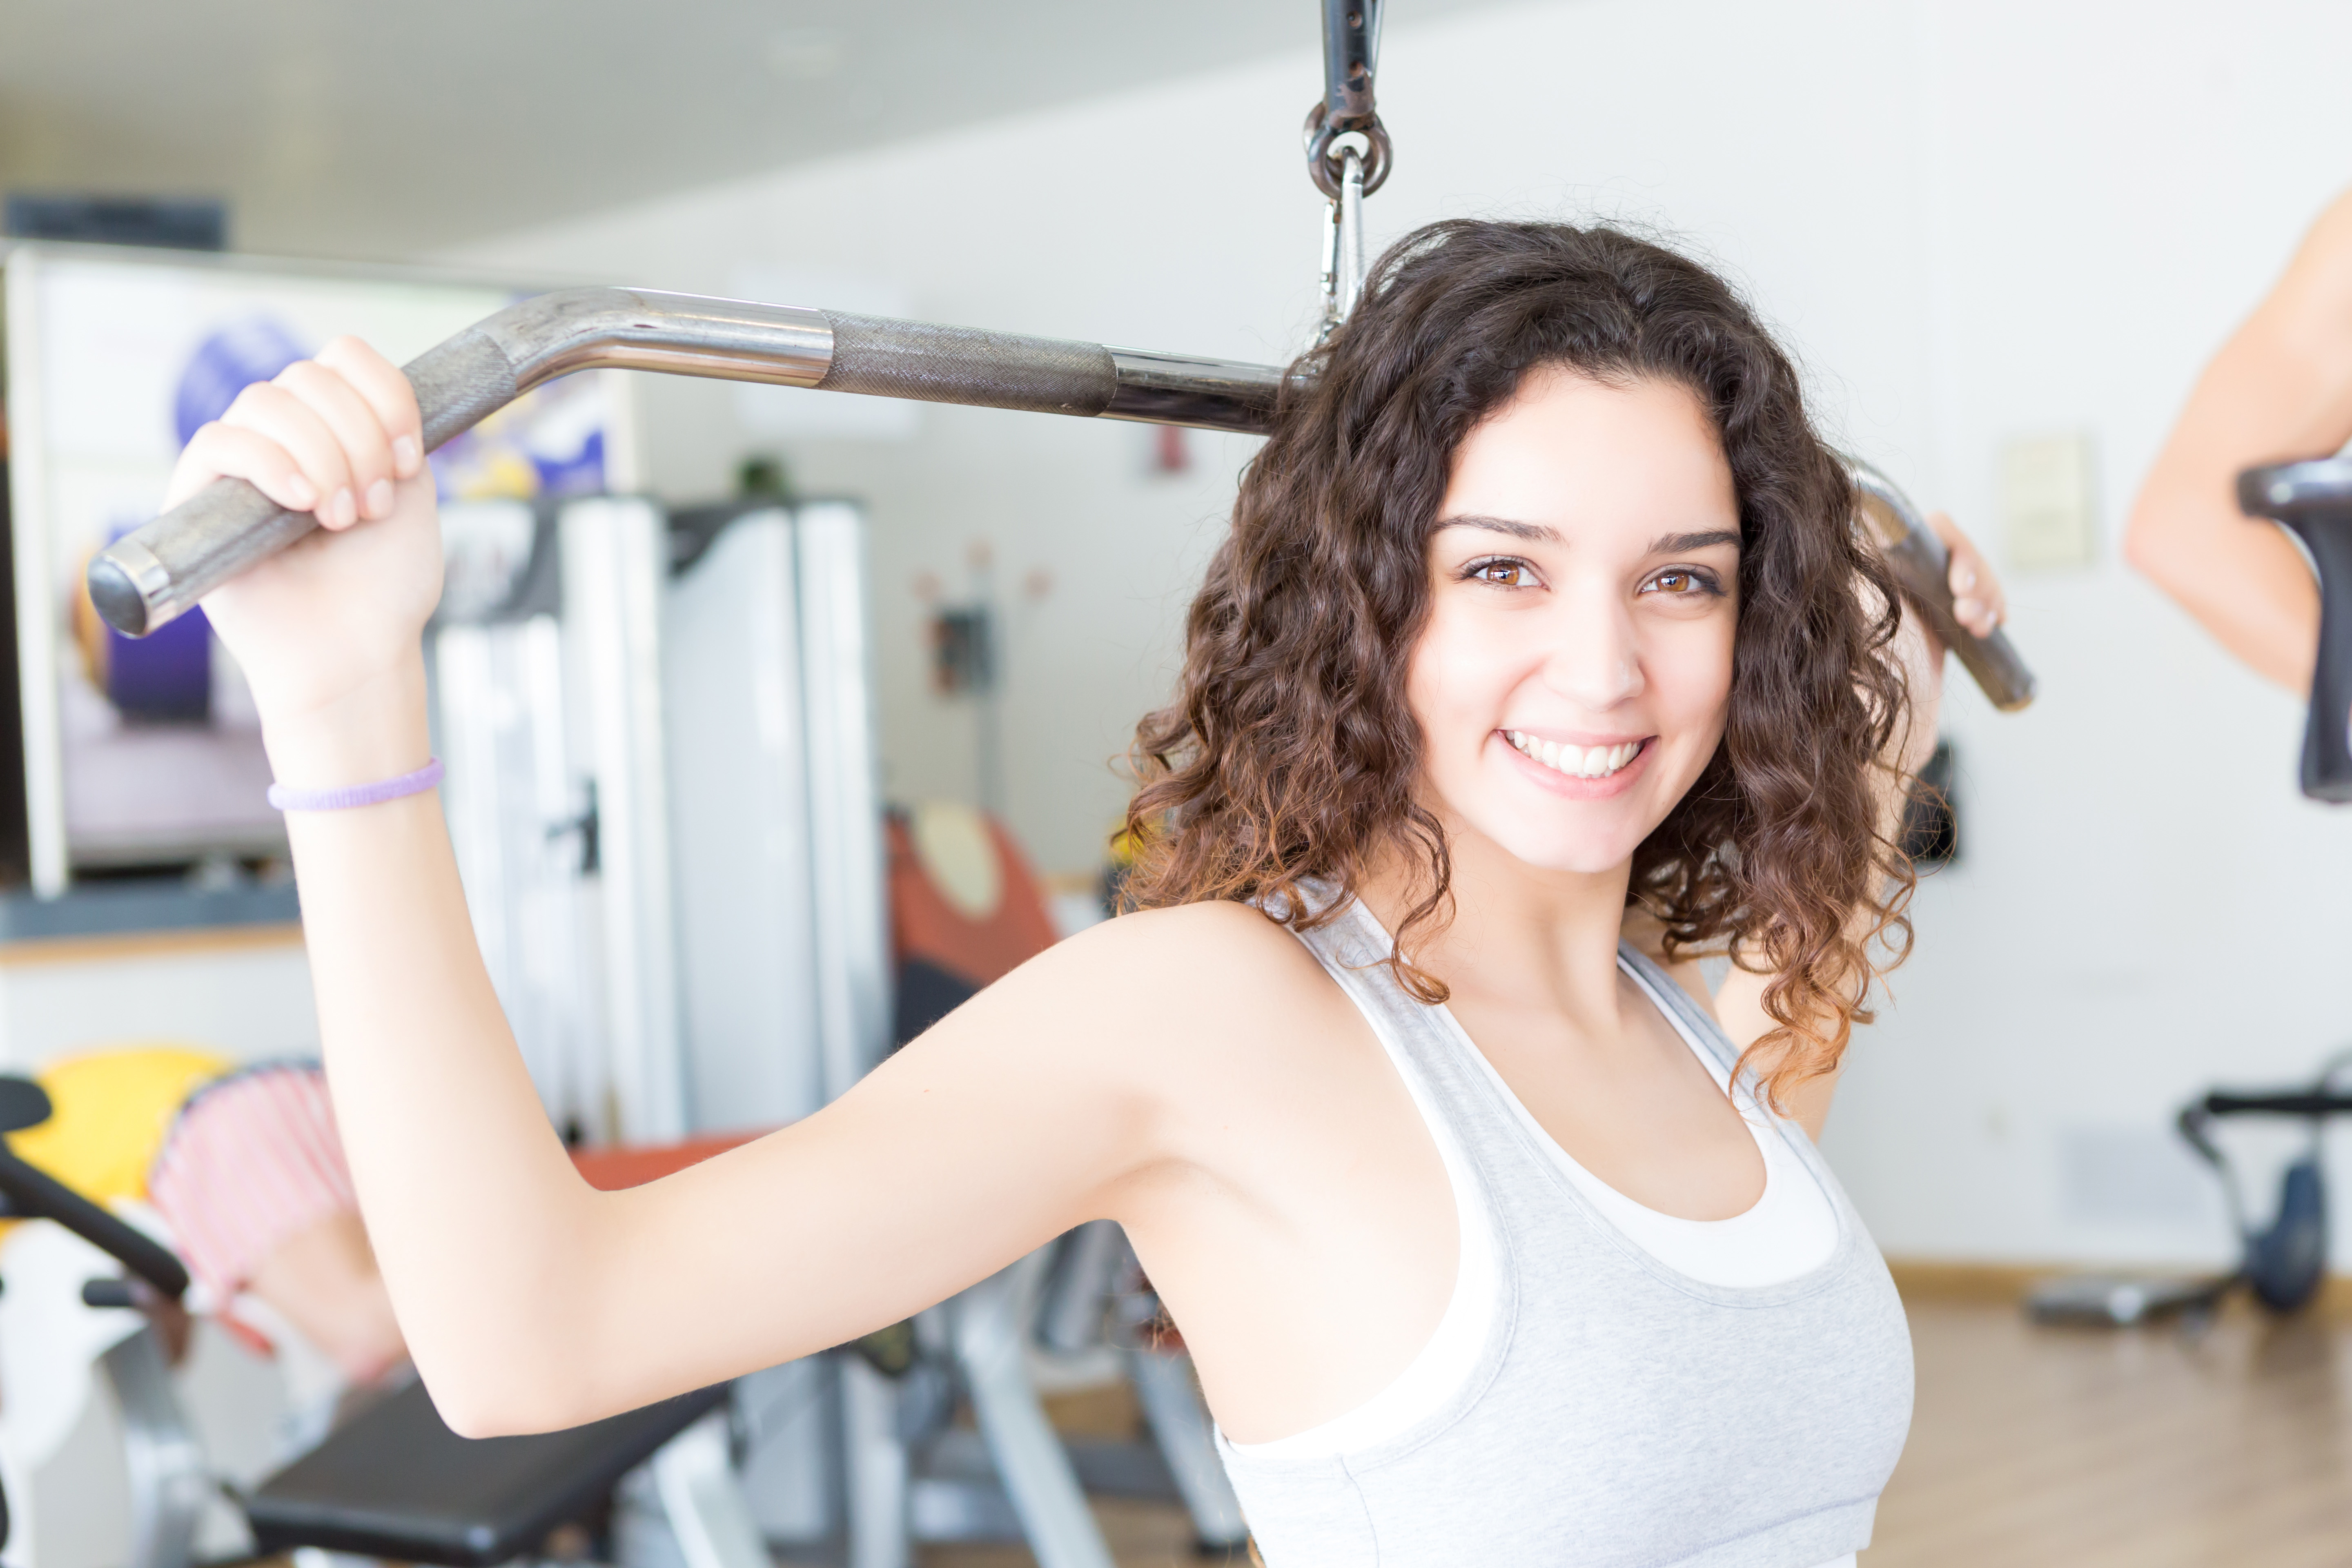 An Introduction to the Lat Pull Down Machine